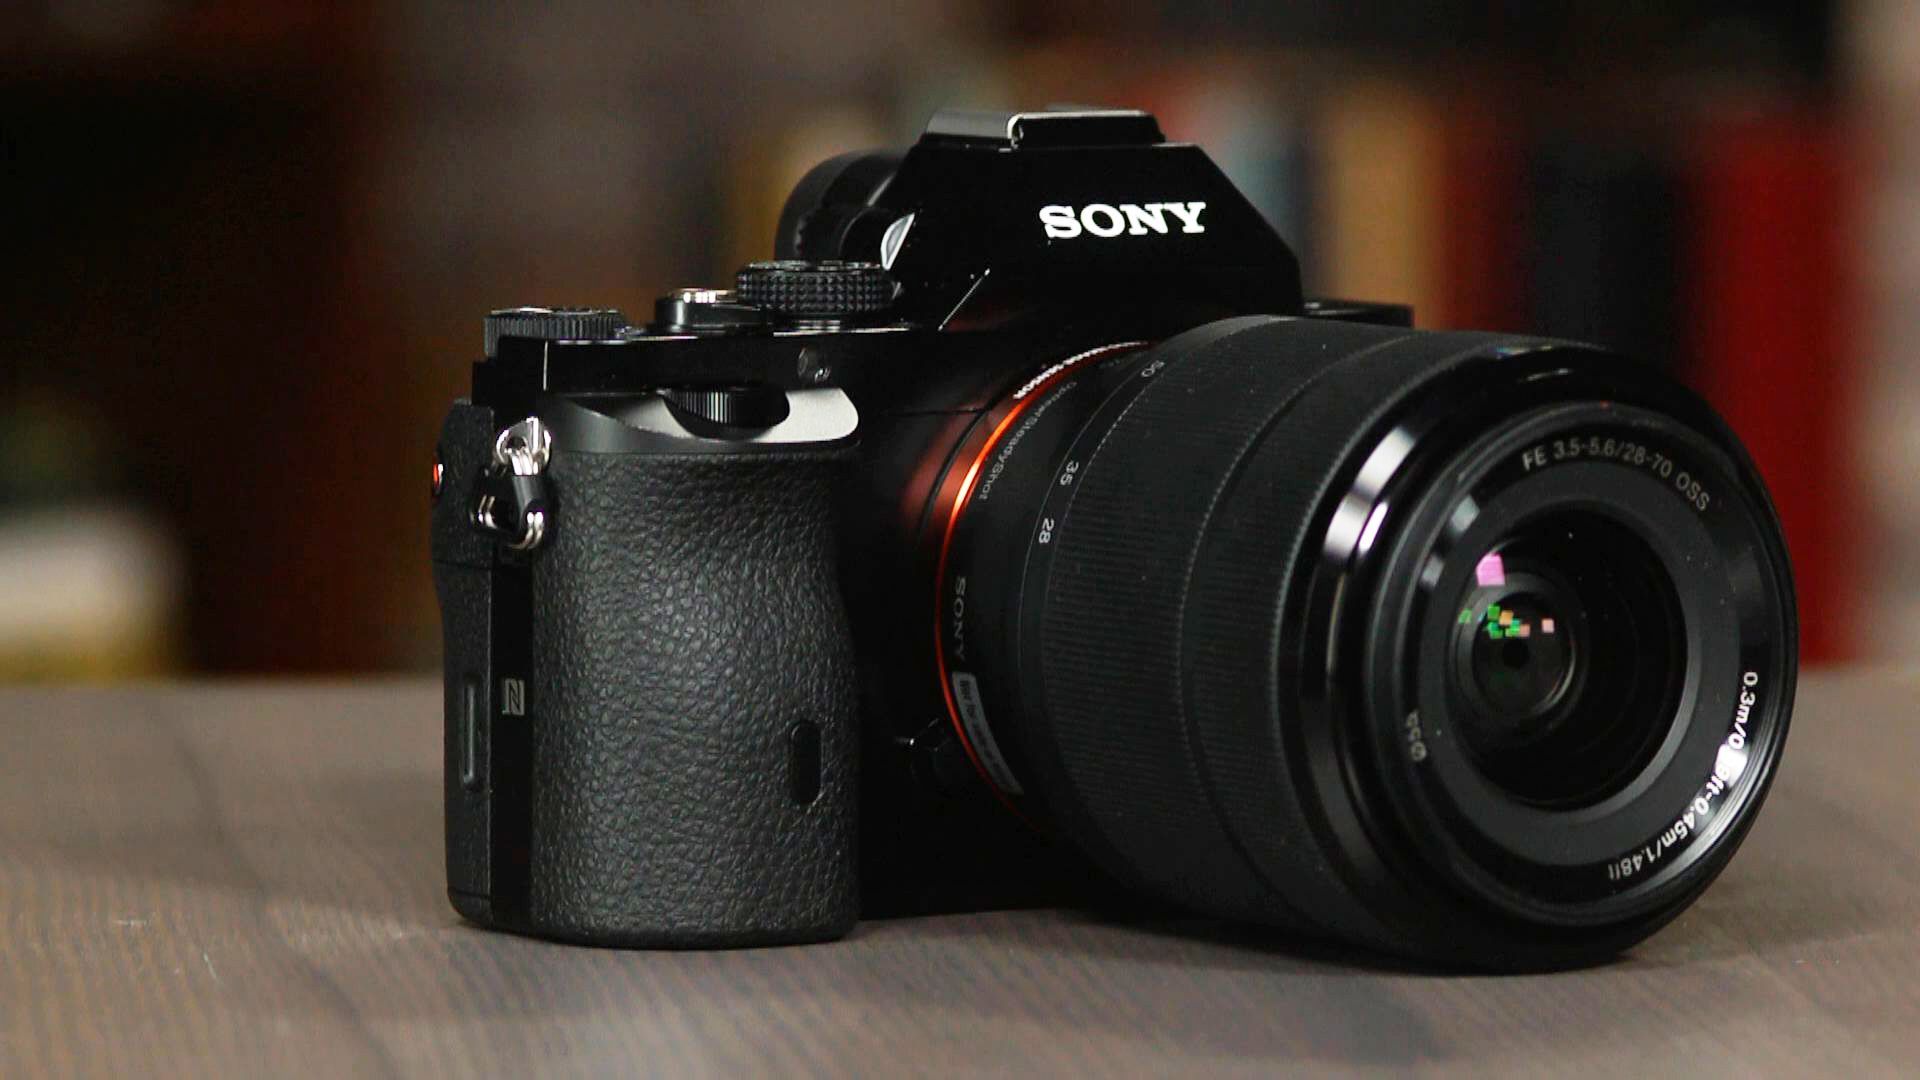 Sony A7: A Welcome Step Up From Smaller Sensors